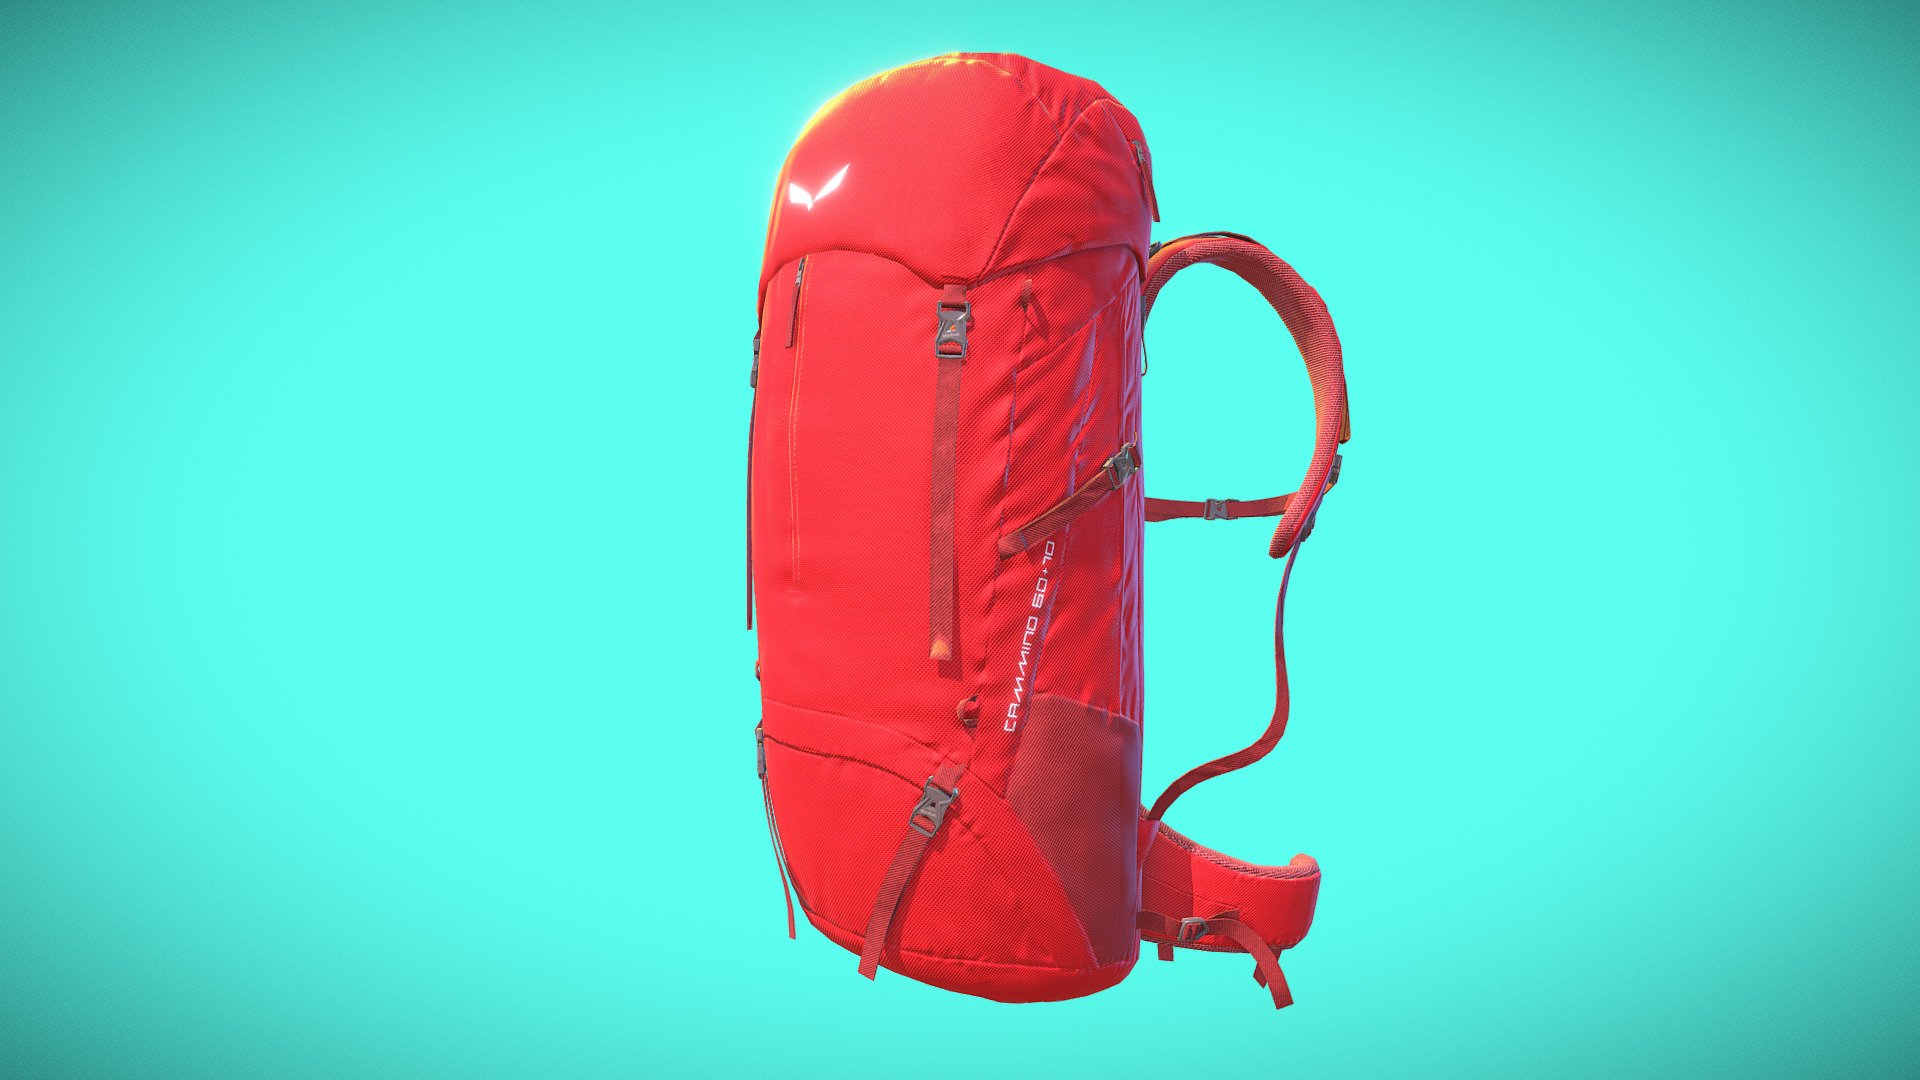 3D MODEL
This model is made using zbrush and blender.
Texturing using substance painter.
No plugin needed to open scene.

MATERIALS AND TEXTURES

Textures are 4096x4096 and 2048x2048.
All textures are in PNG format.

RedHikingBackpack1_Base Color.Png (4096x4096).
RedHikingBackpack1_AO.Png (4096x4096).
RedHikingBackpack1_Normal.Png (4096x4096).
RedHikingBackpack1_Roughness.Png (4096x4096).
RedHikingBackpack1_Metallic.Png (4096x4096).
RedHikingBackpack2_Base Color.Png (2048x2048).
RedHikingBackpack2_AO.Png (2048x2048).
RedHikingBackpack2_Roughness.Png (2048x2048).
RedHikingBackpack2_Roughness.Png (2048x2048).
RedHikingBackpack2_Metallic.Png (2048x2048) 3d model